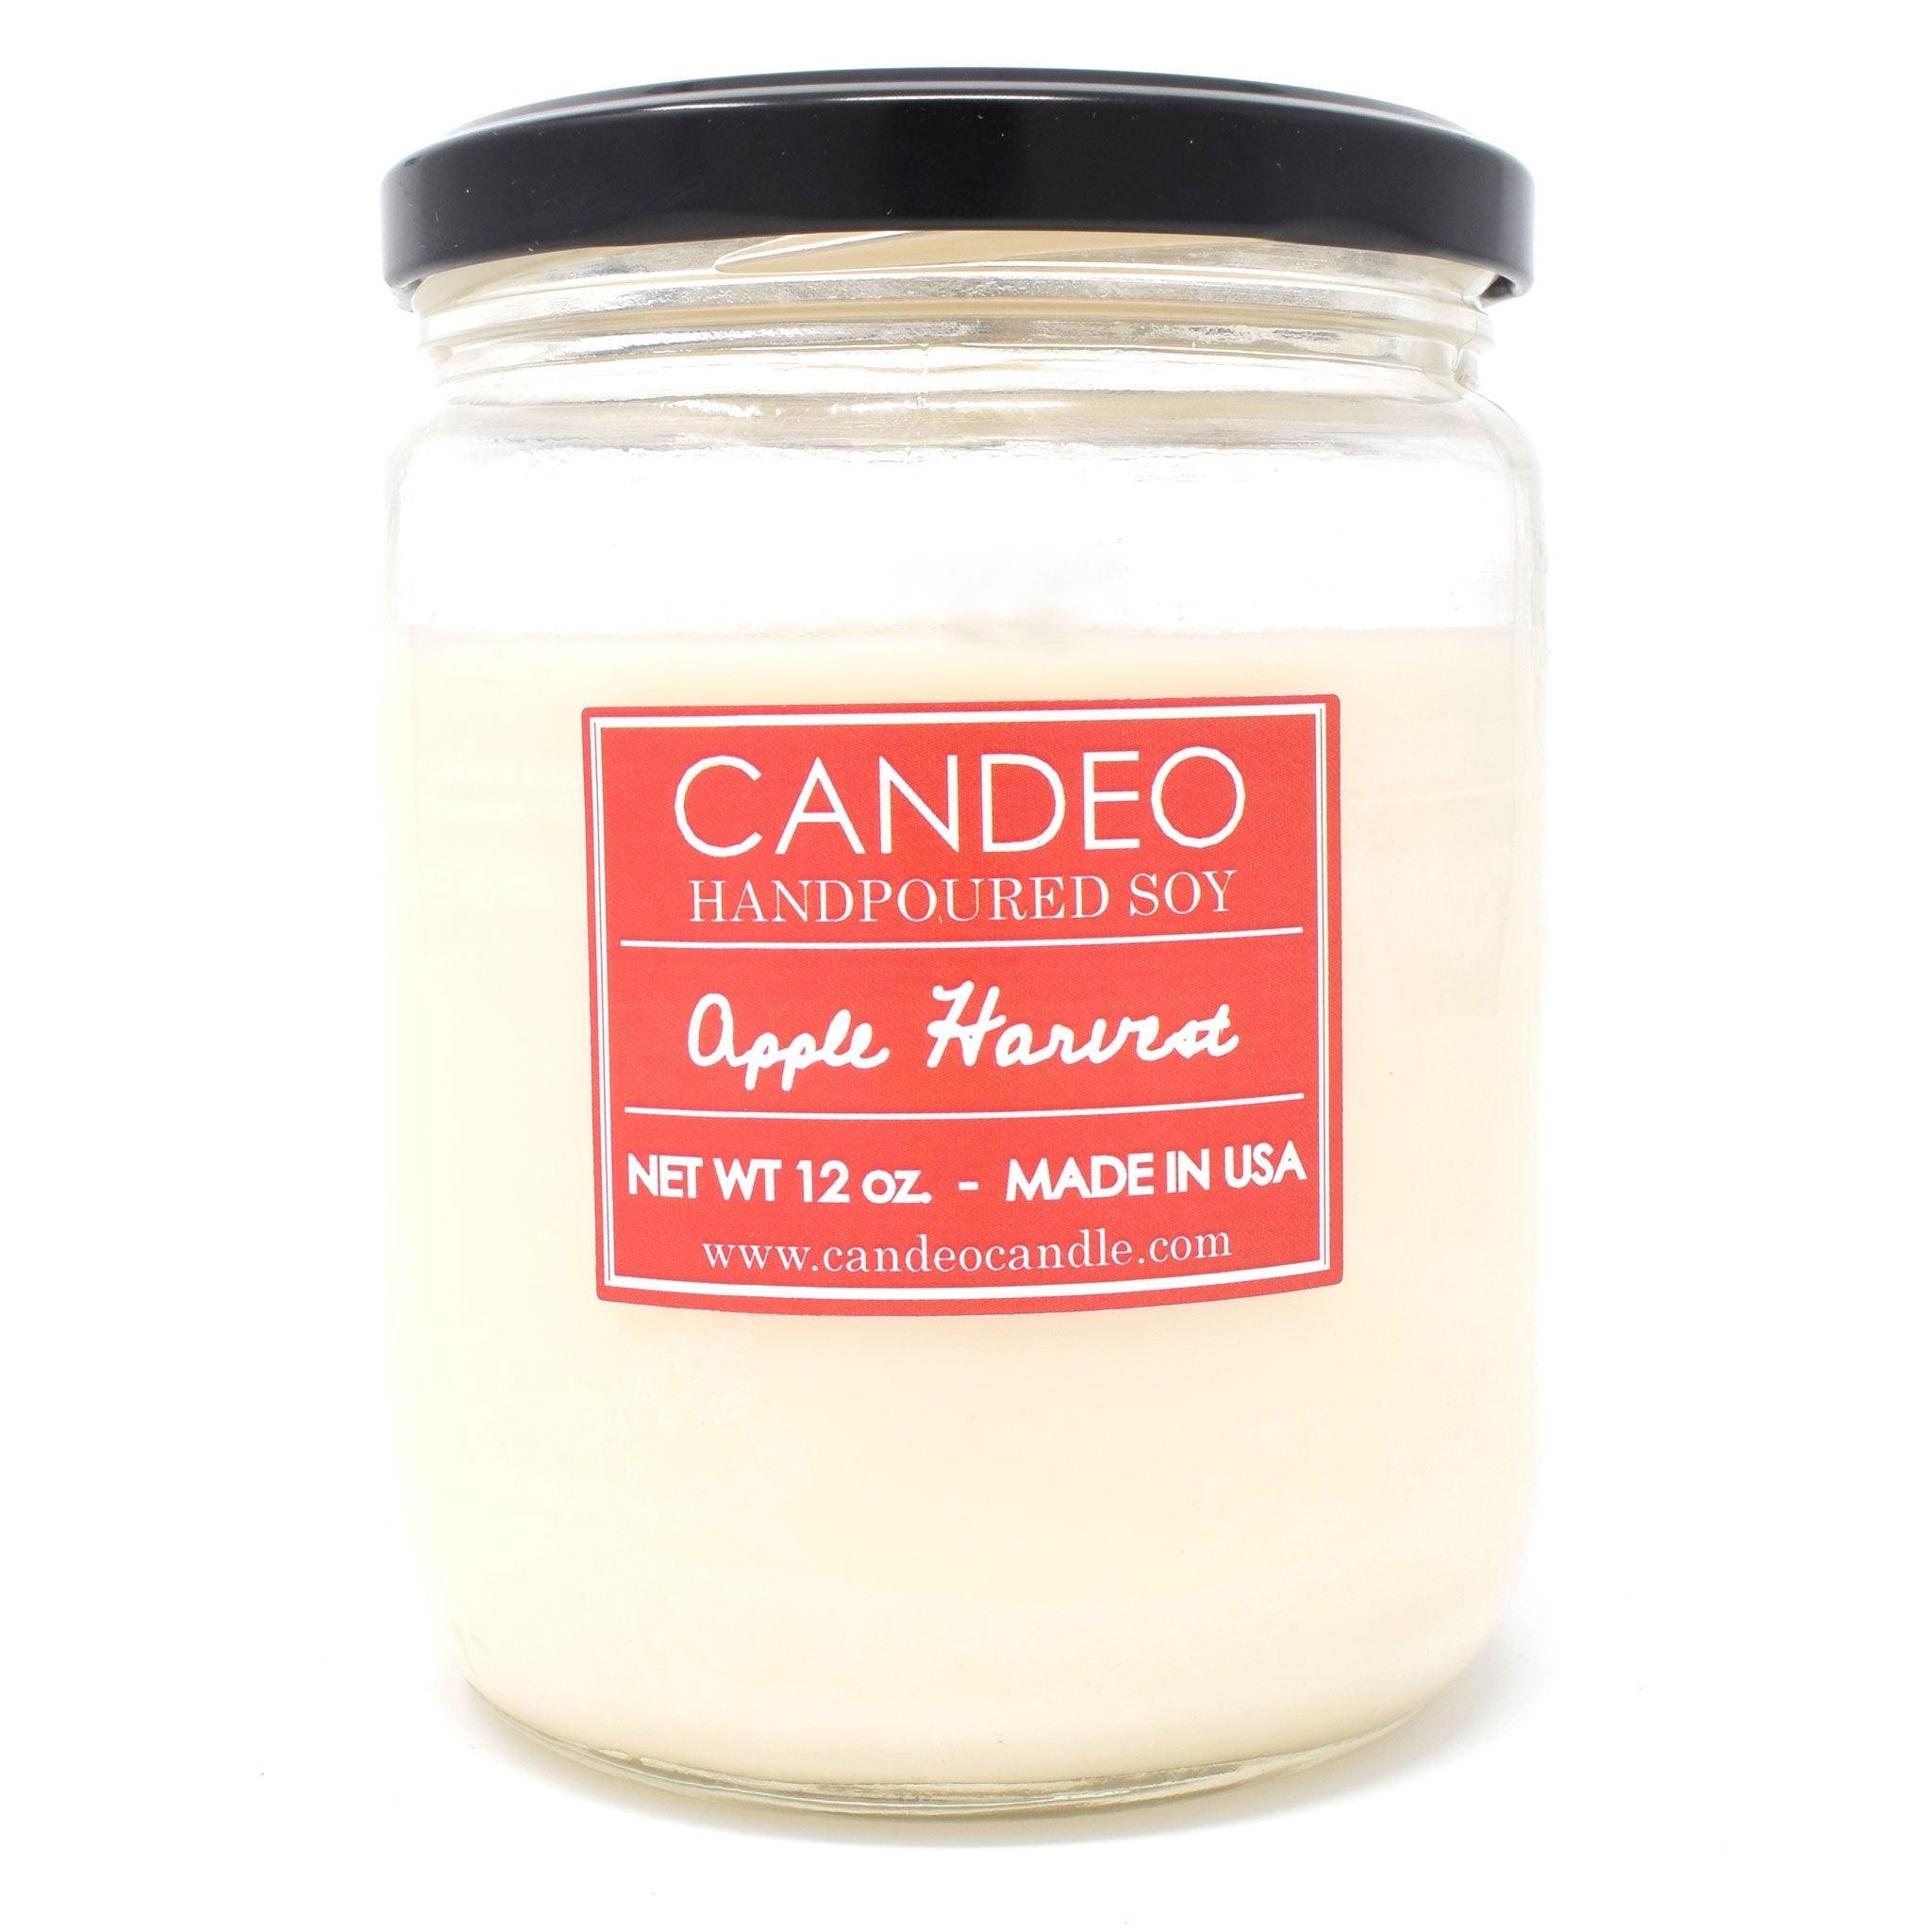 Caffe Latte, 14oz Soy Candle Jar - Candeo Candle